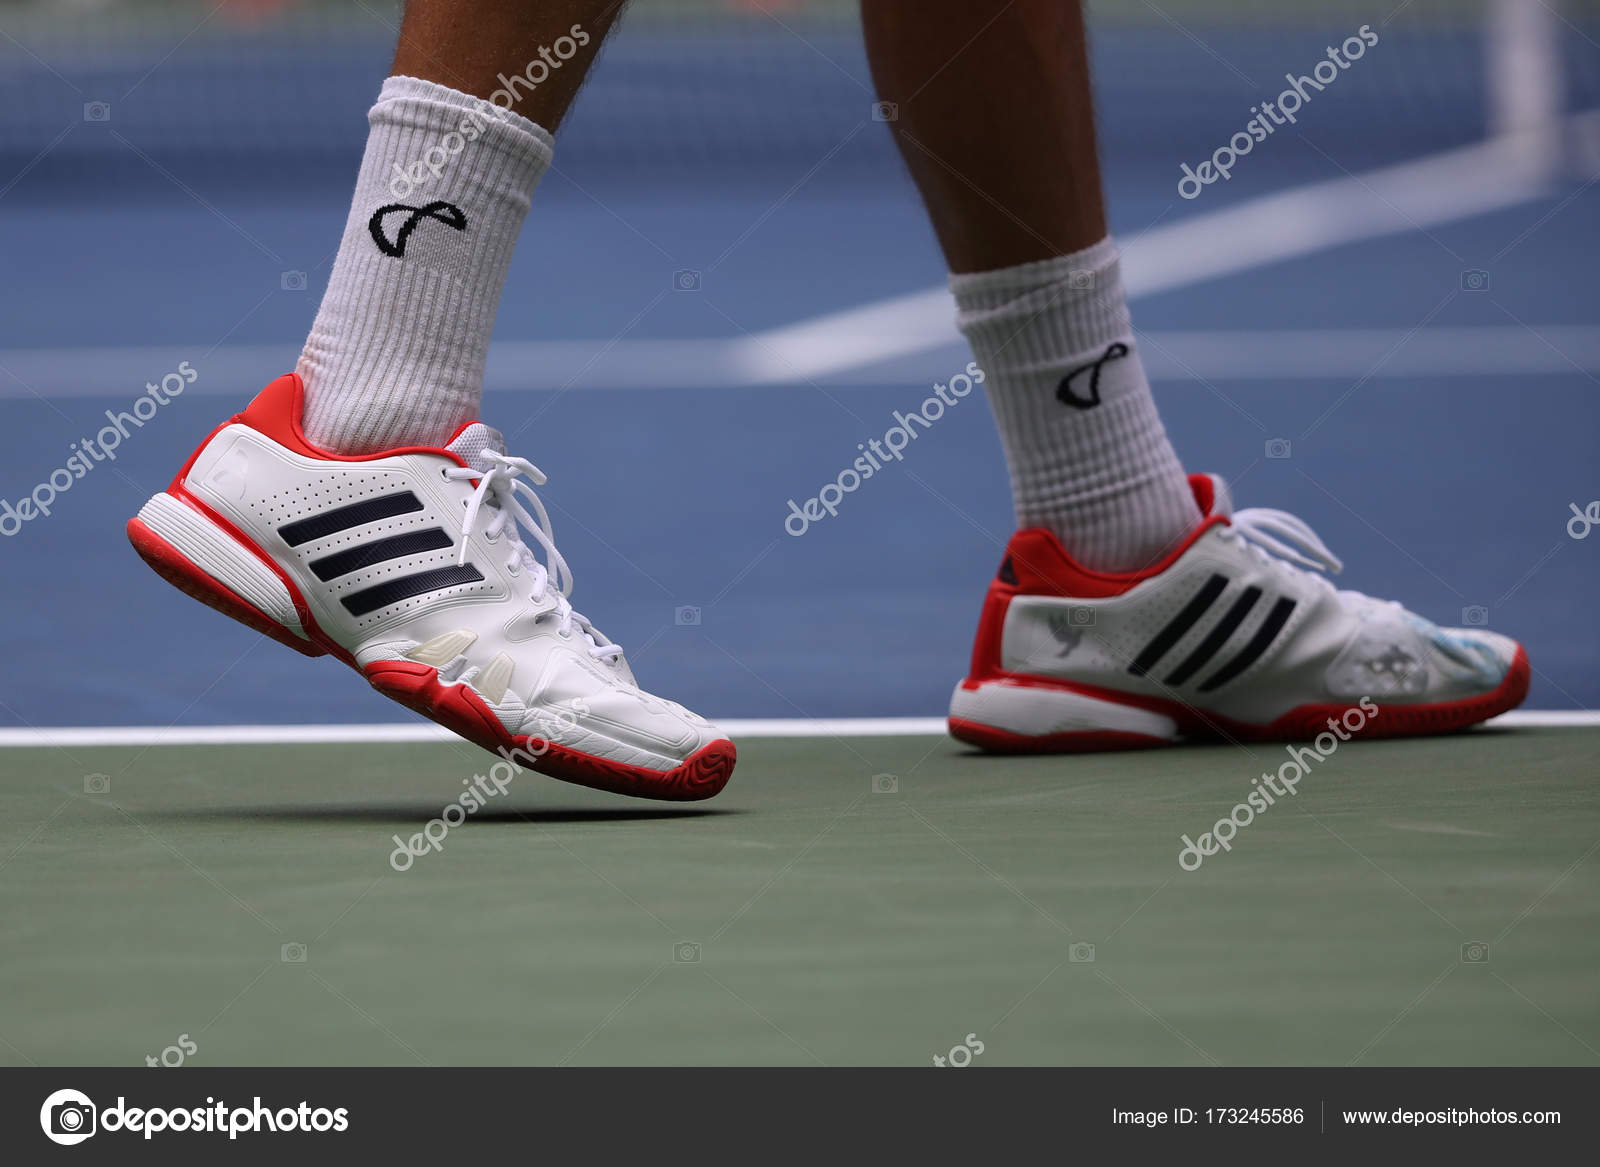 Professional tennis player Tennys Sandgren of USA wears Adidas special edition Babolat 7 Djokovic tennis shoes during his 2017 US first round match – Stock Editorial Photo © zhukovsky #173245586